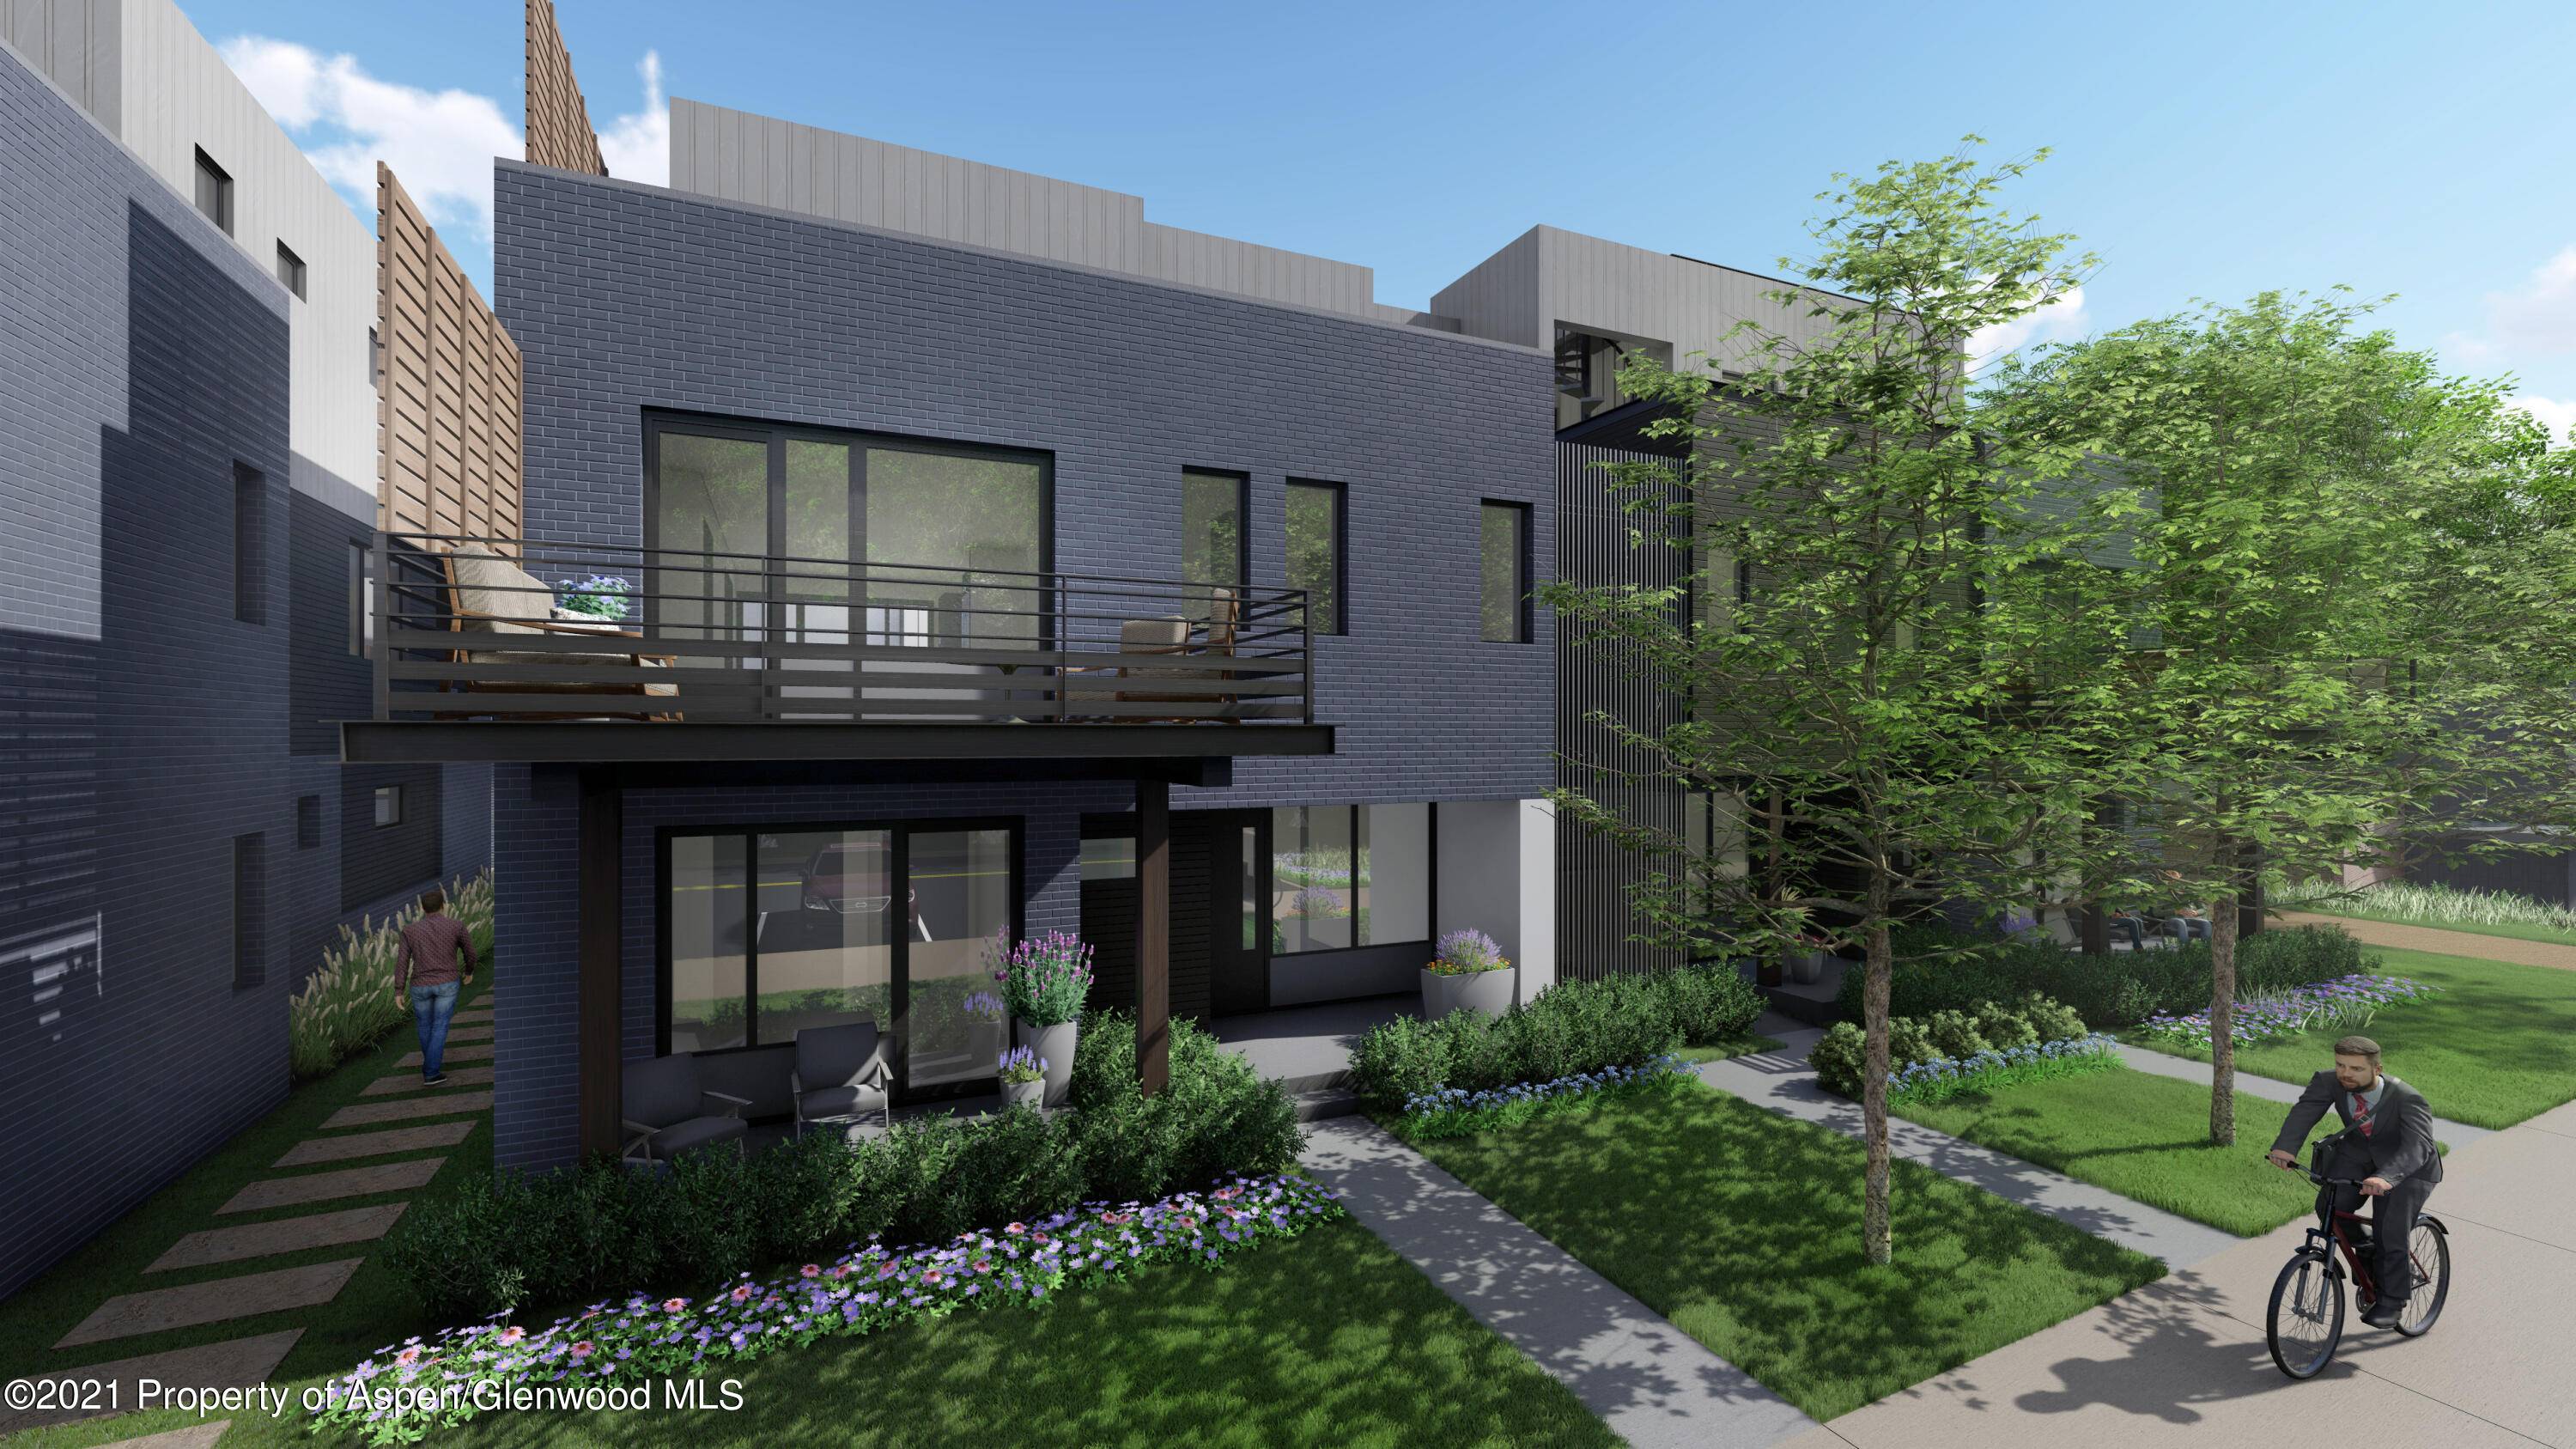 Introducing Park Place Phase II a collection of three residences within the Basalt River Park neighborhood along the Roaring Fork River.